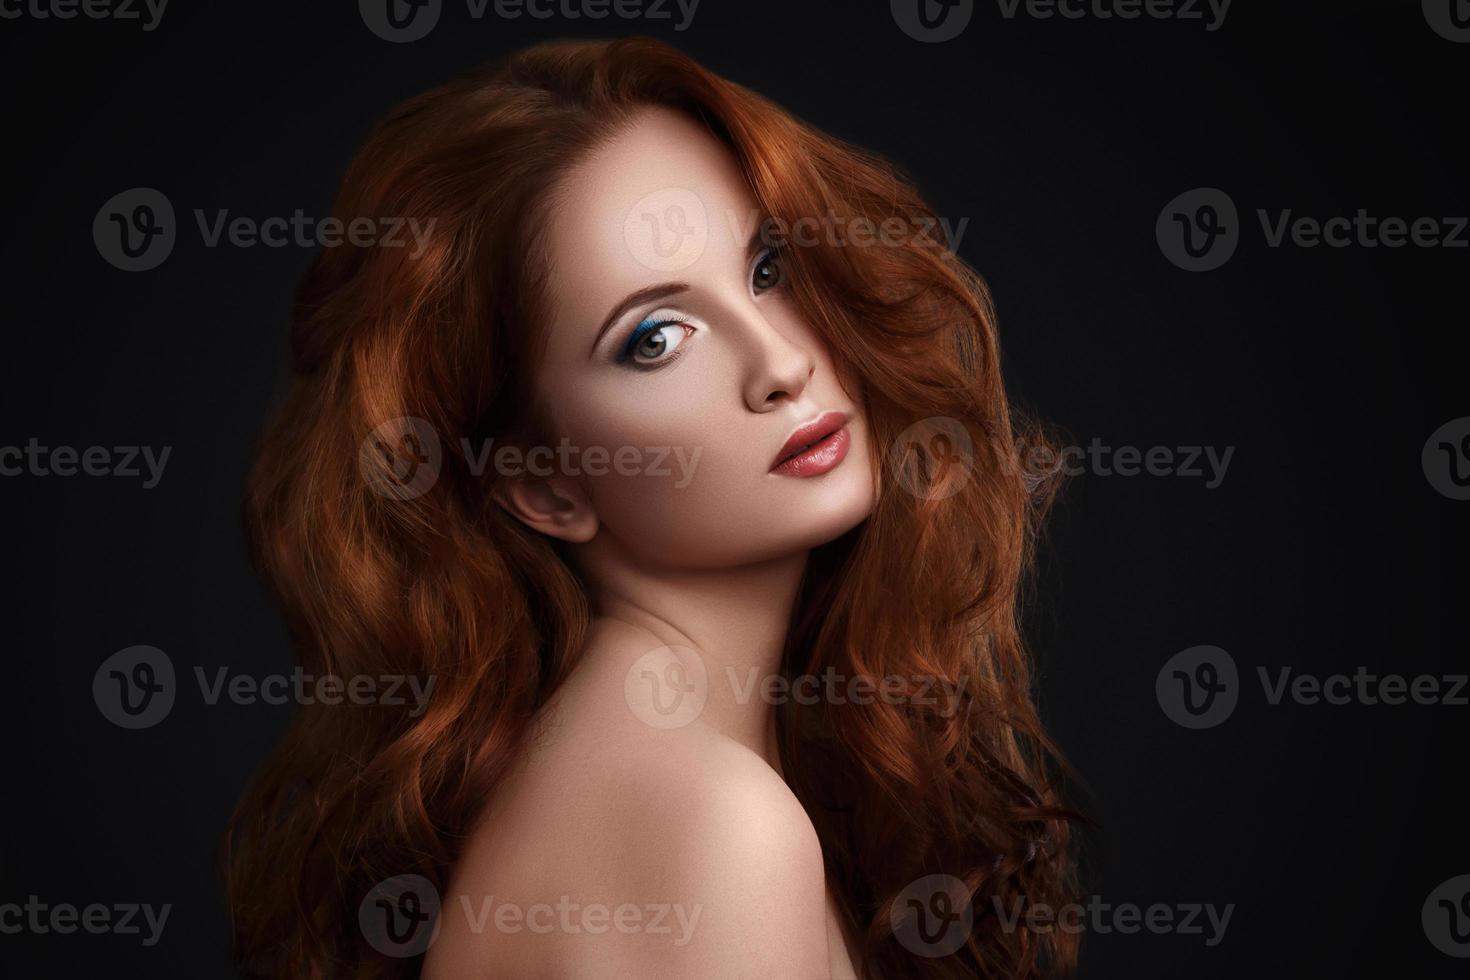 Portrait of woman with beautiful red hair photo